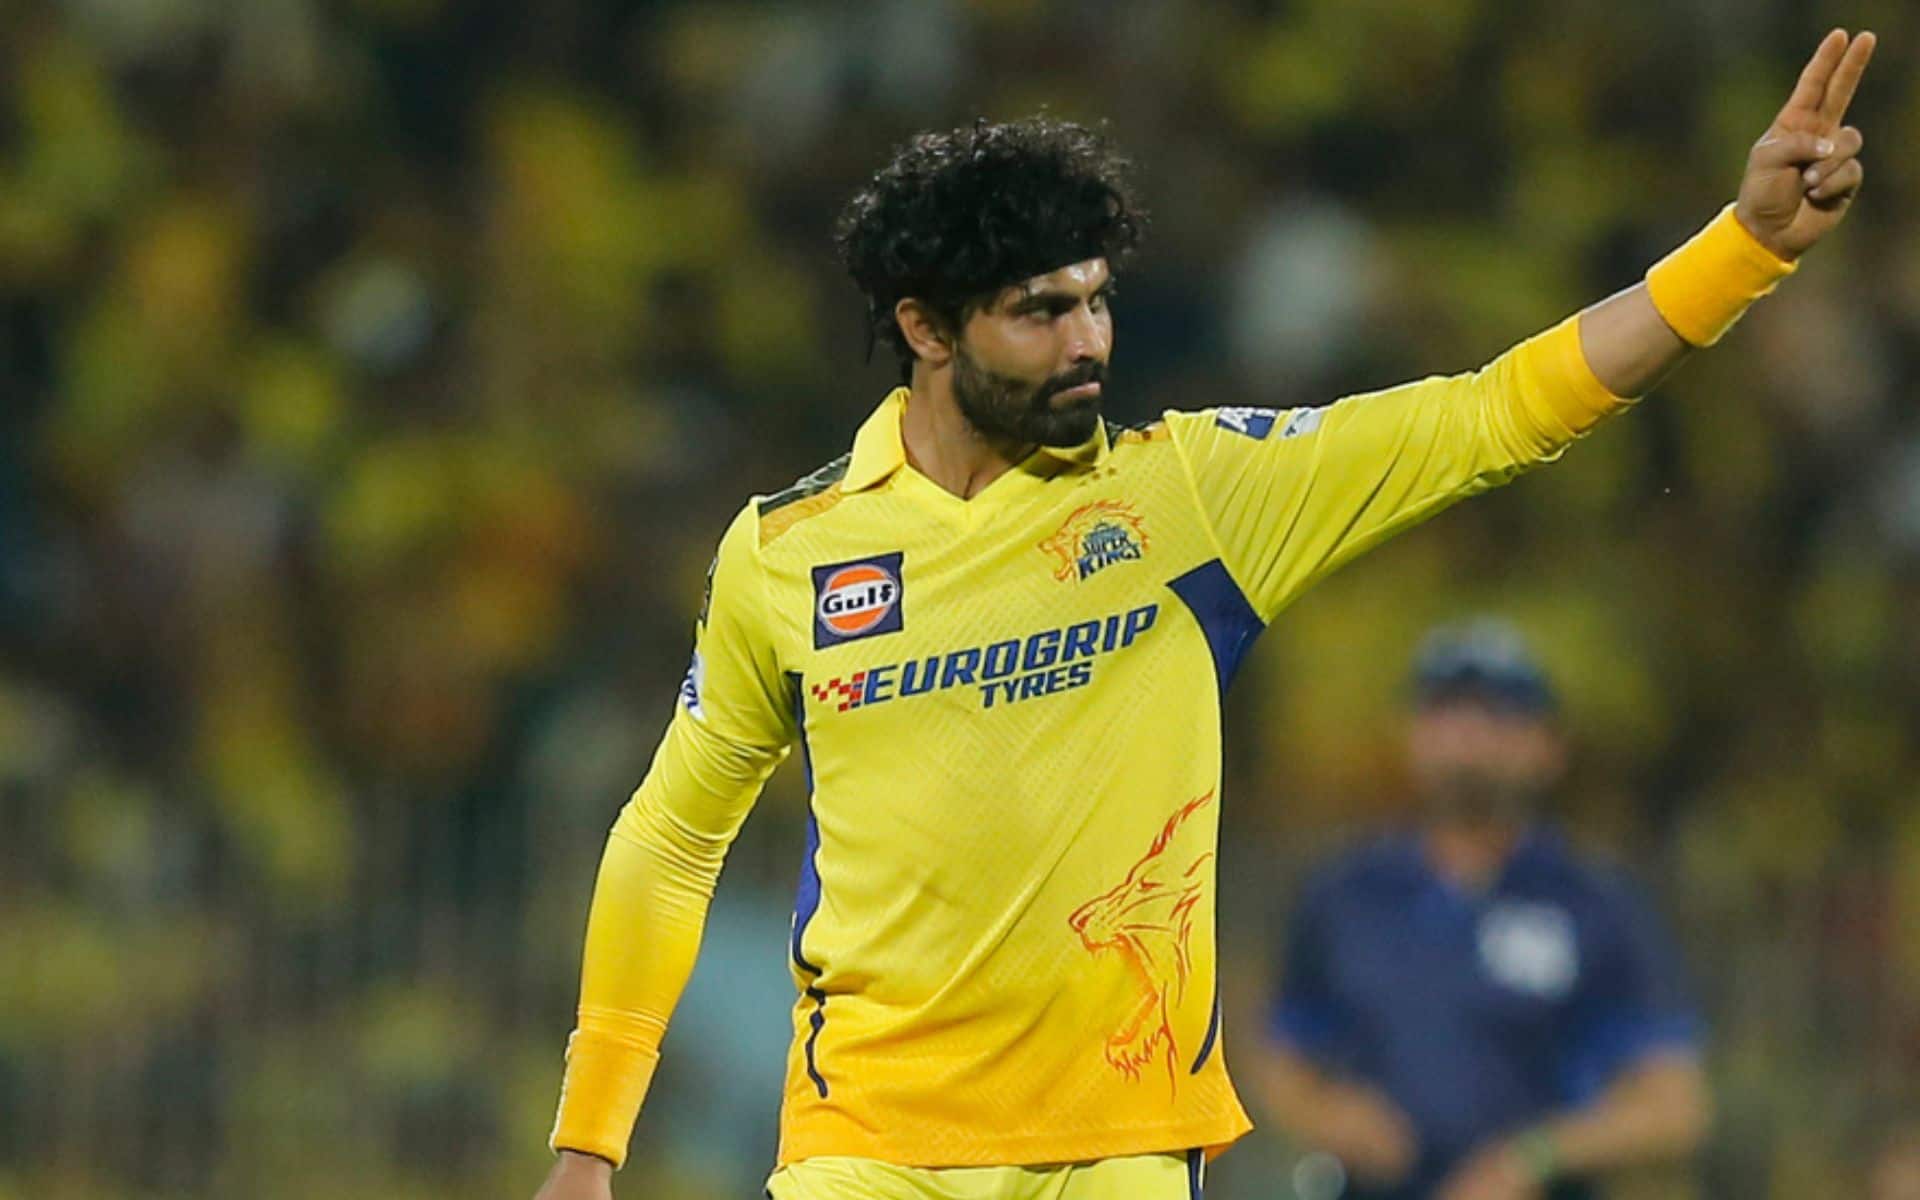 Ravindra Jadeja will play a crucial role for CSK in the match [AP Photos]